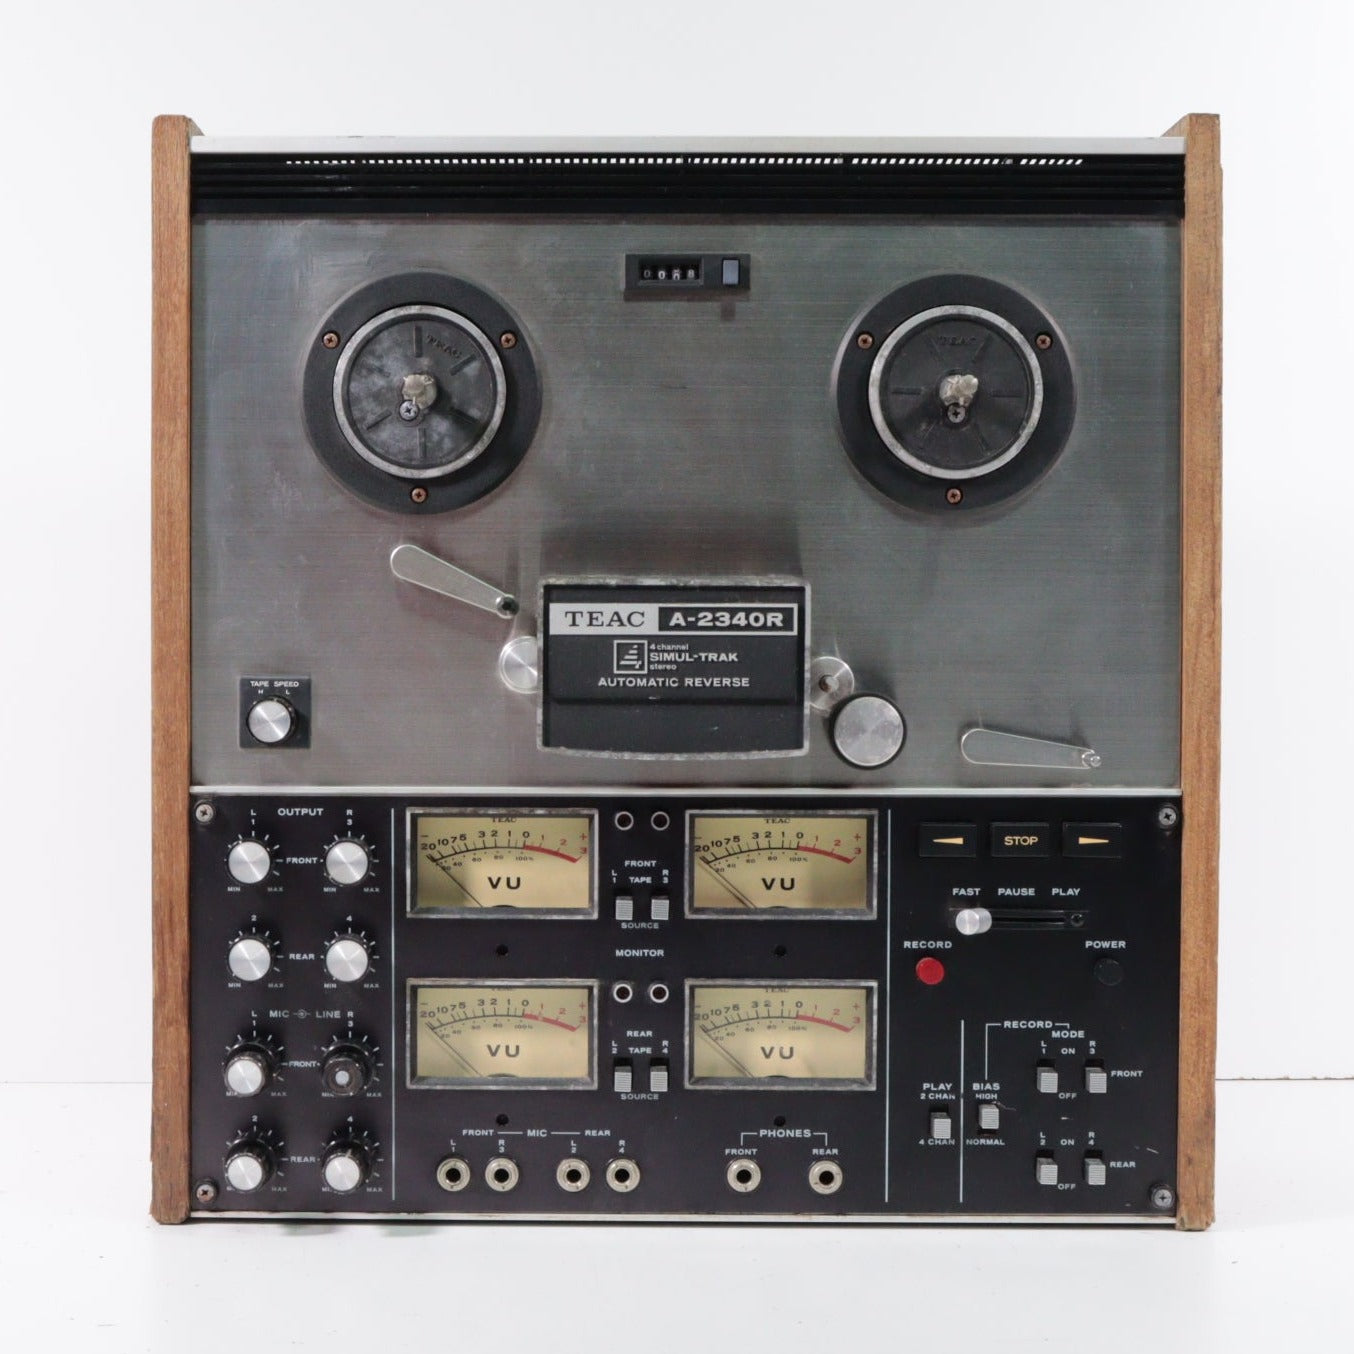 Teac A-2340R Reel-to-Reel Player Recorder (PINCH ROLLER